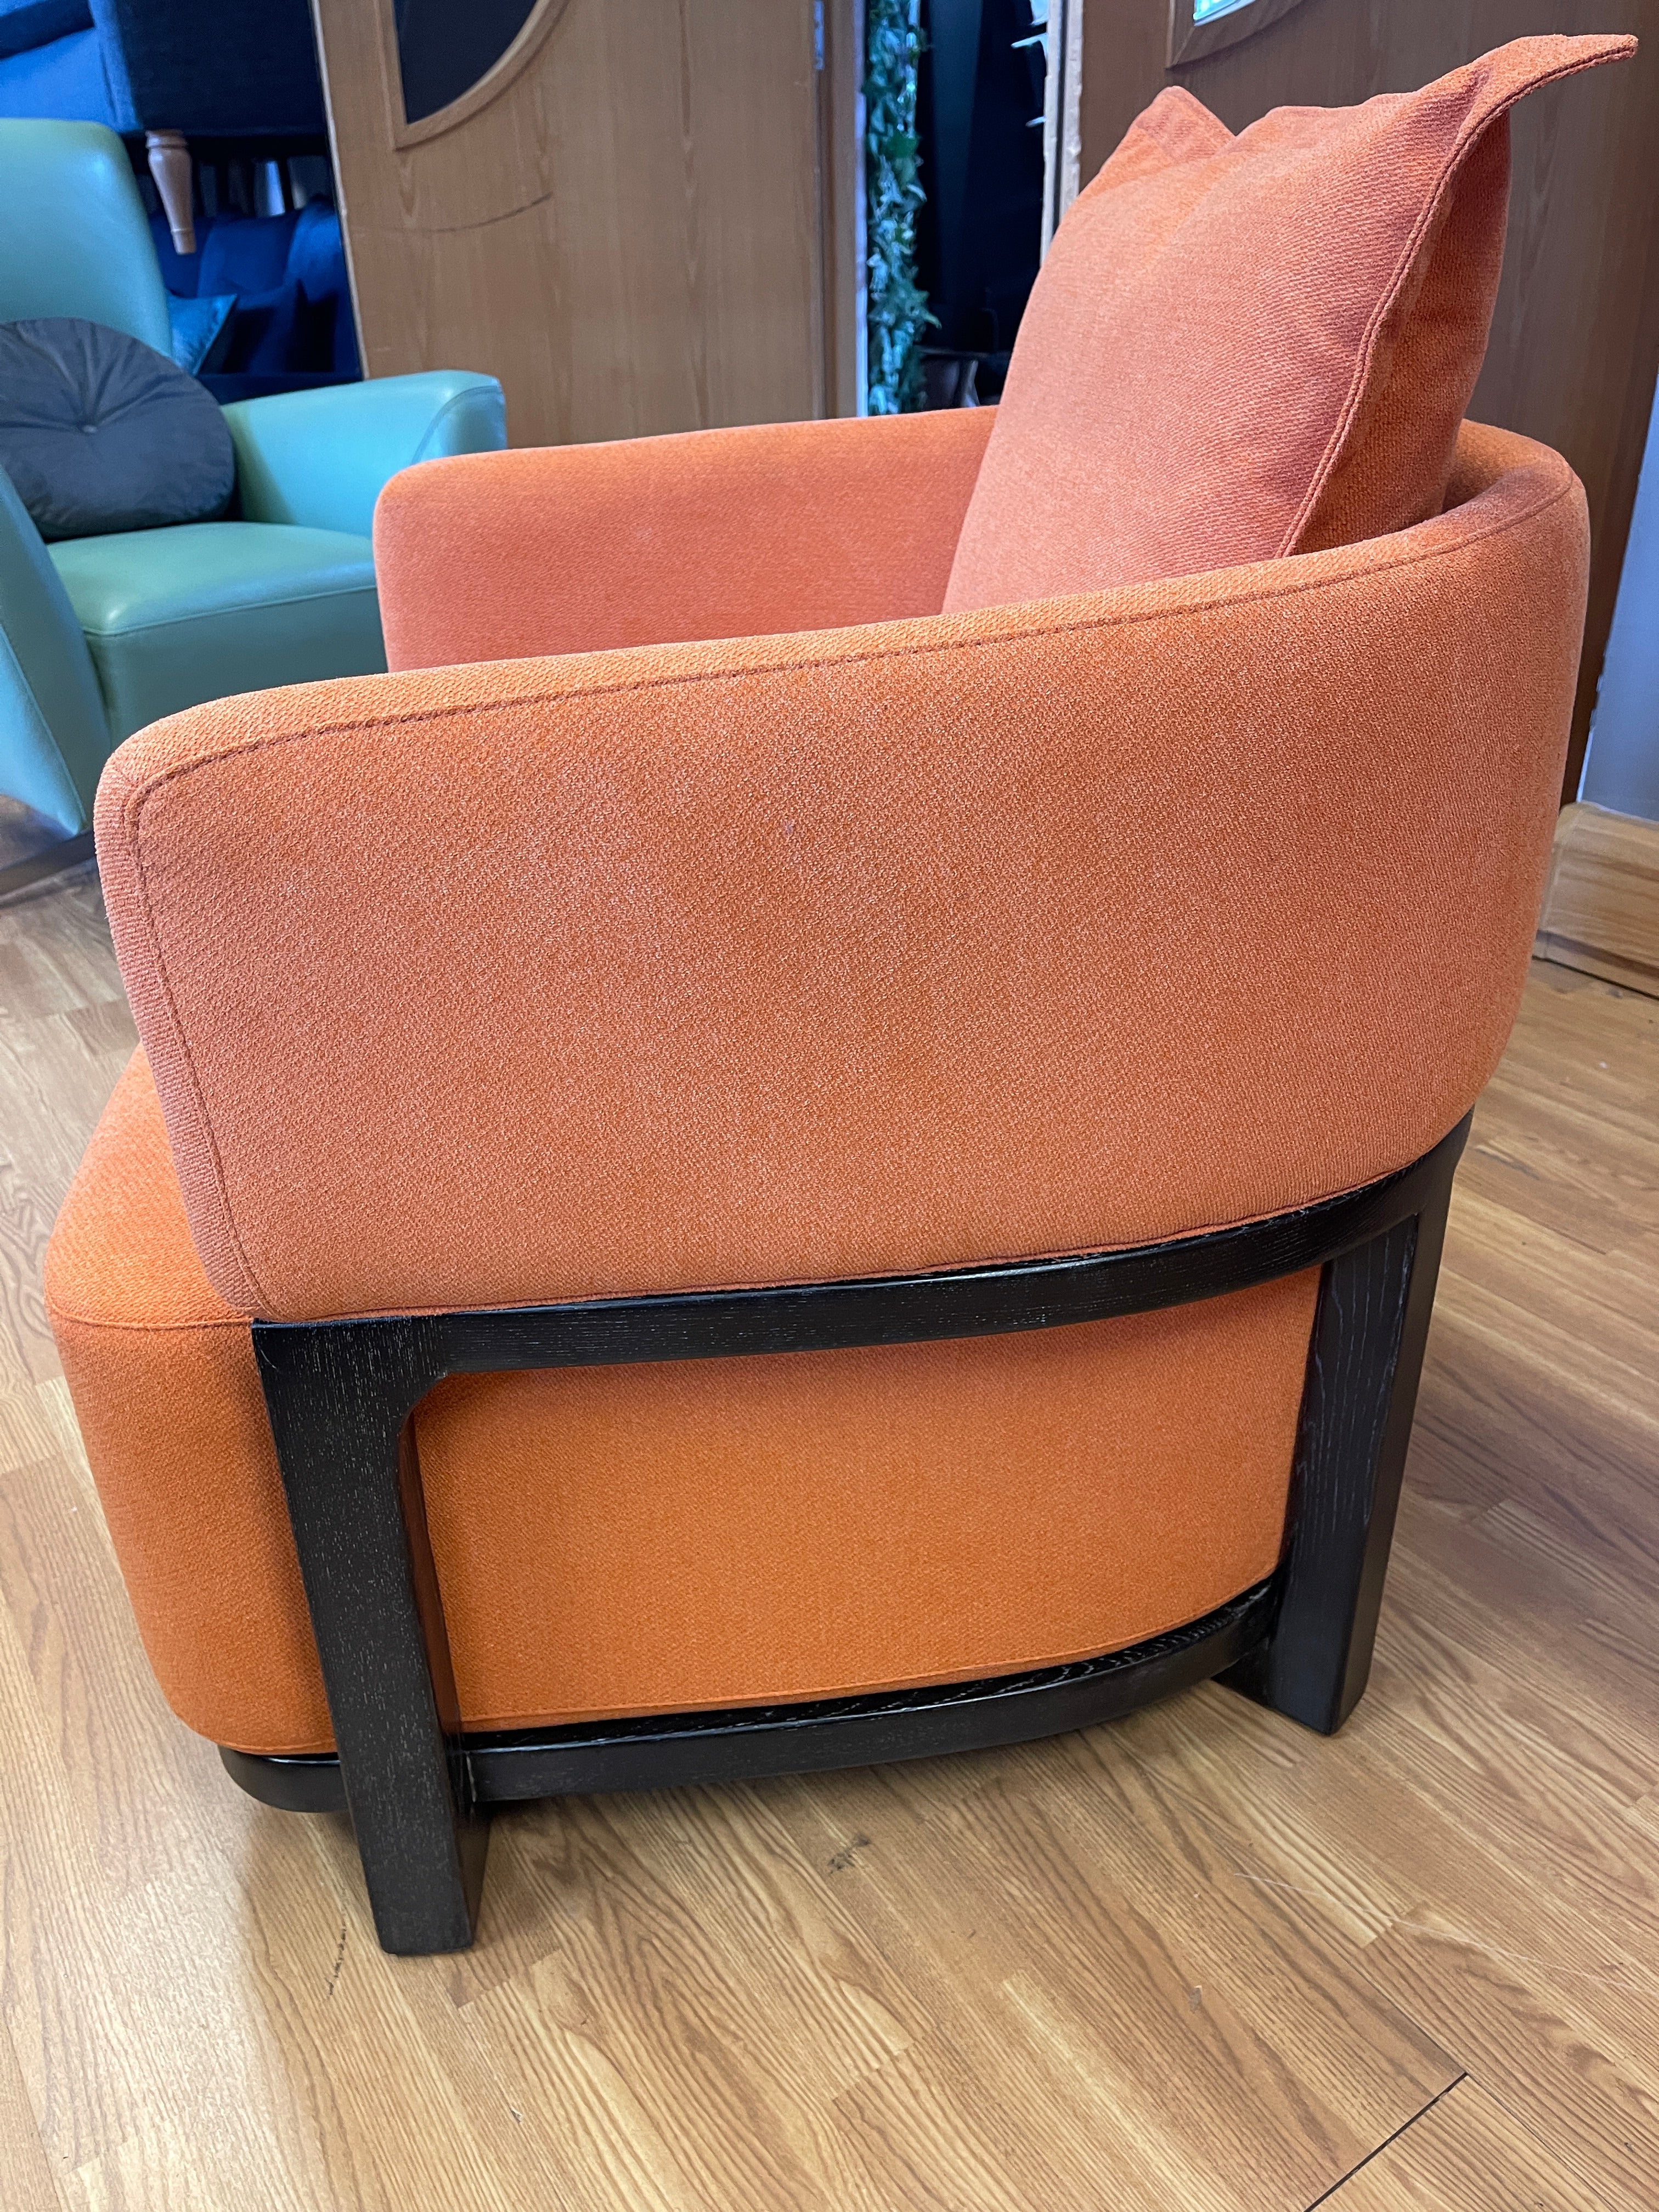 WHITE LABEL Lounge Club style small accent chair in orange fabric